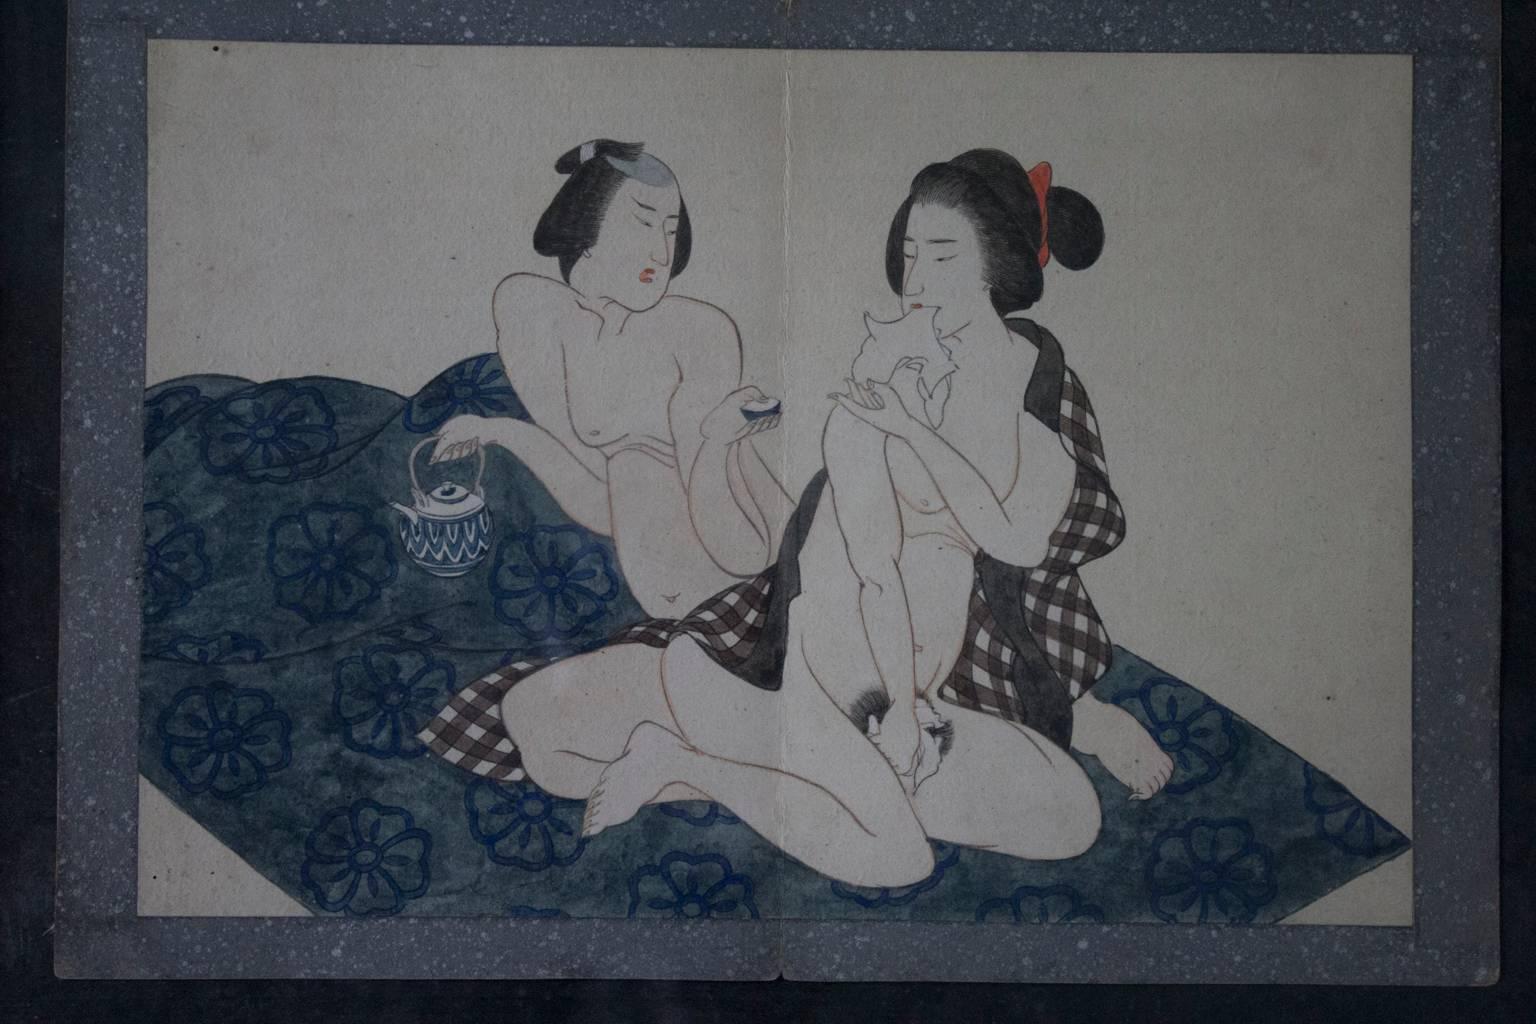 Shunga was heavily influenced by illustrations in Chinese medicine manuals beginning in the Muromachi era (1336-1573). Zhou Fang, a great Tang-dynasty Chinese erotic painter, is also thought to have been influential. He, like many erotic artists of